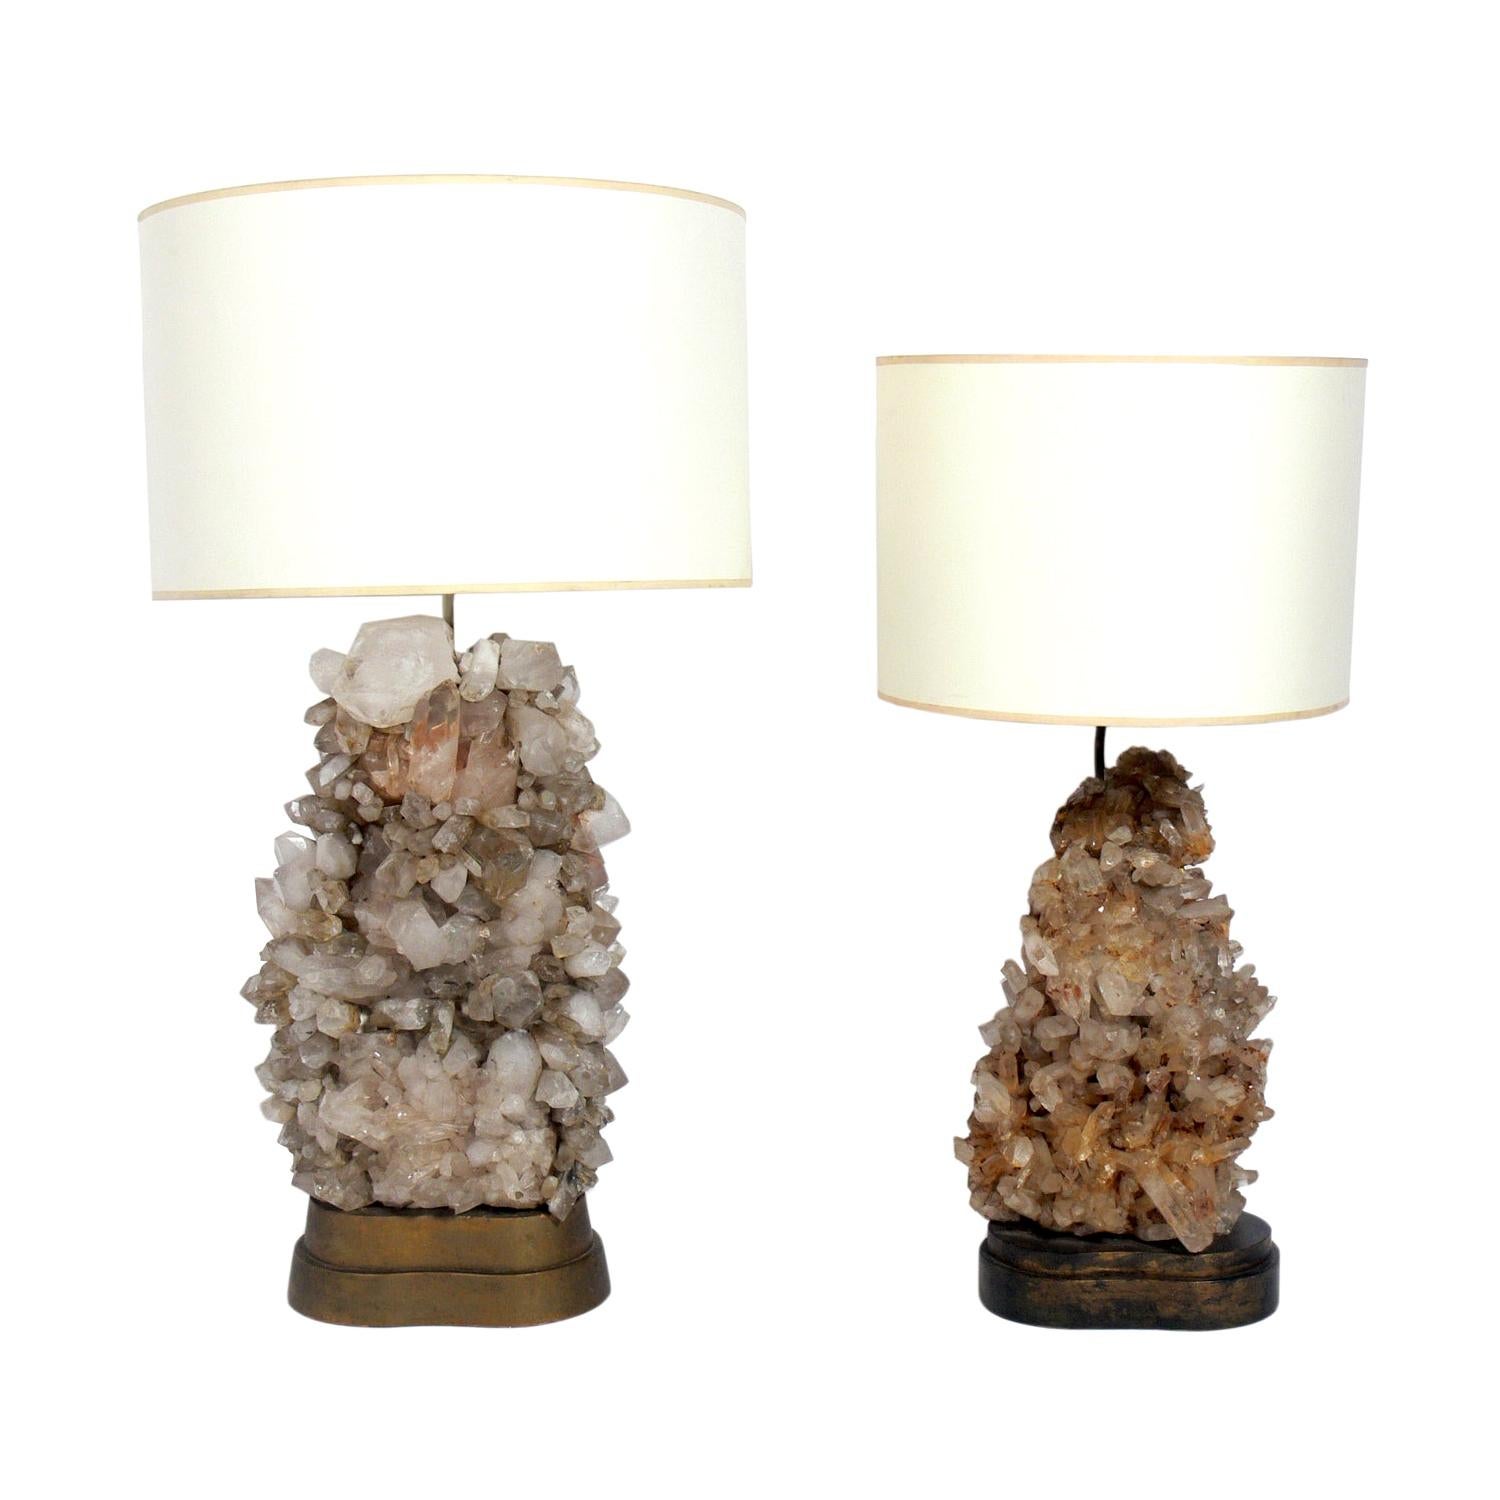 Rock Crystal Lamps designed by Carole Stupell